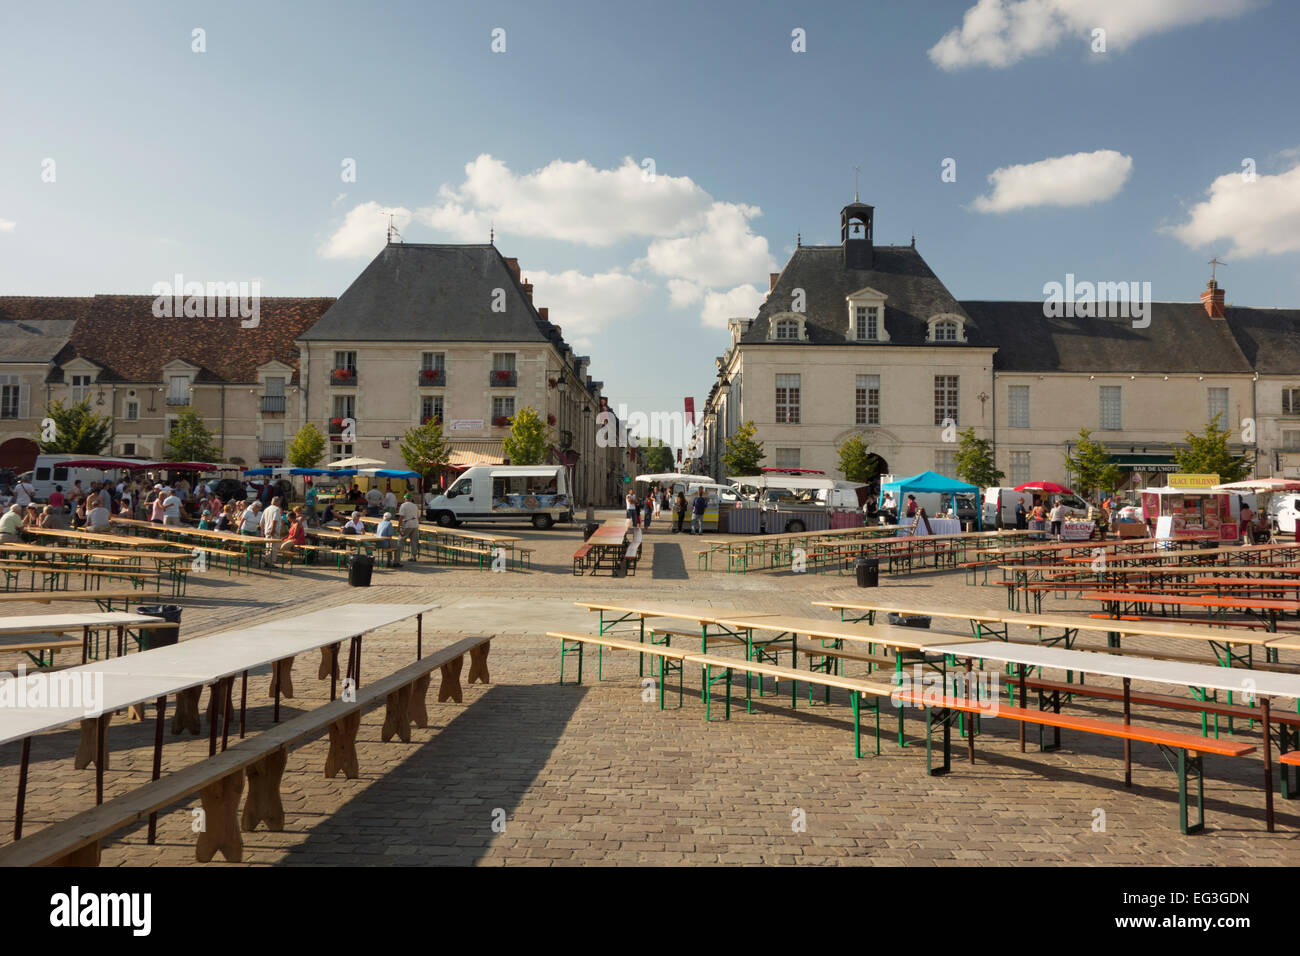 People attending a food festival in the main square at Richelieu. Stock Photo